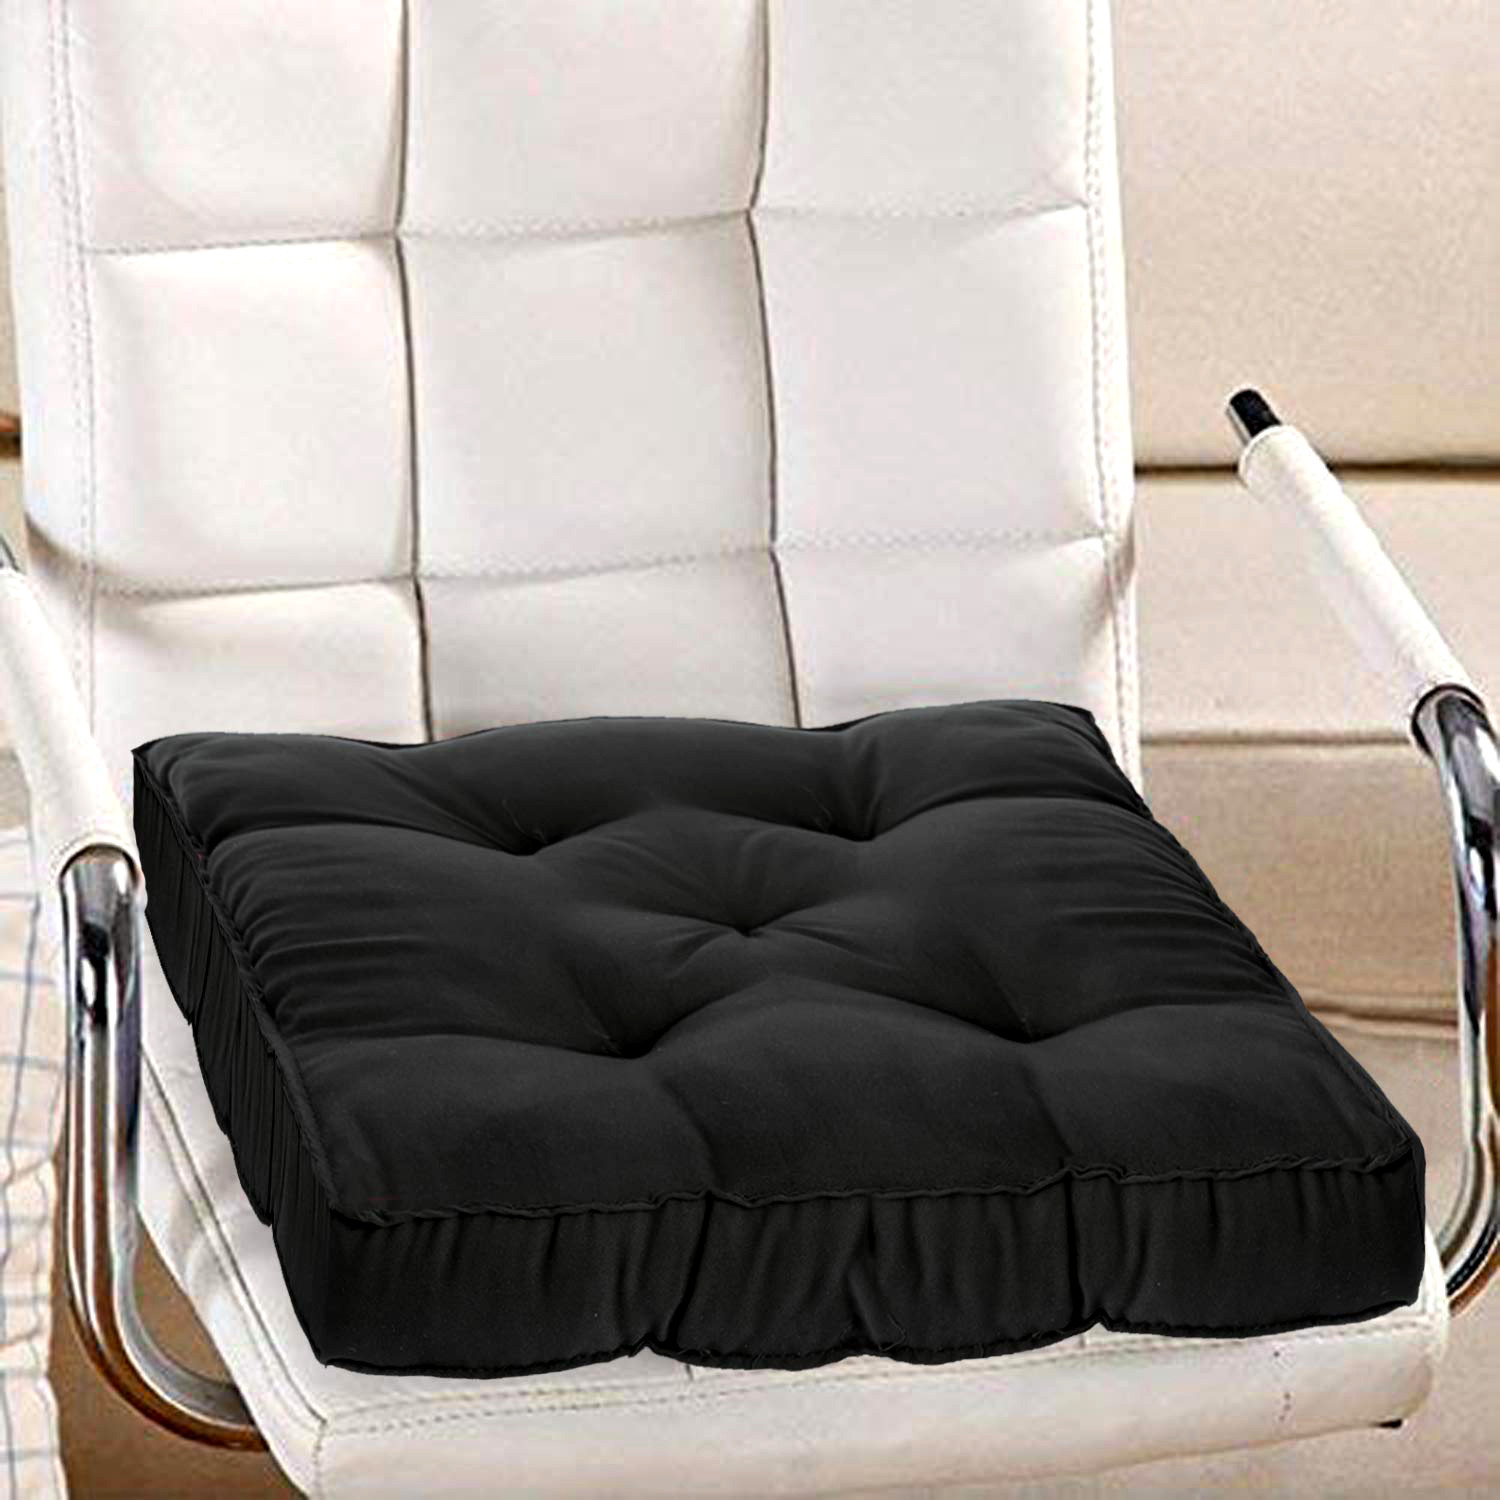 Kuber Industries Microfiber 18*36 Inch Back And Seat Chair Cushion With Ties & 18*18 Inch Square Cushion for Rocking Chair, Desk chair, Dining chairs, Lounge chair- Set of 2 (Black)